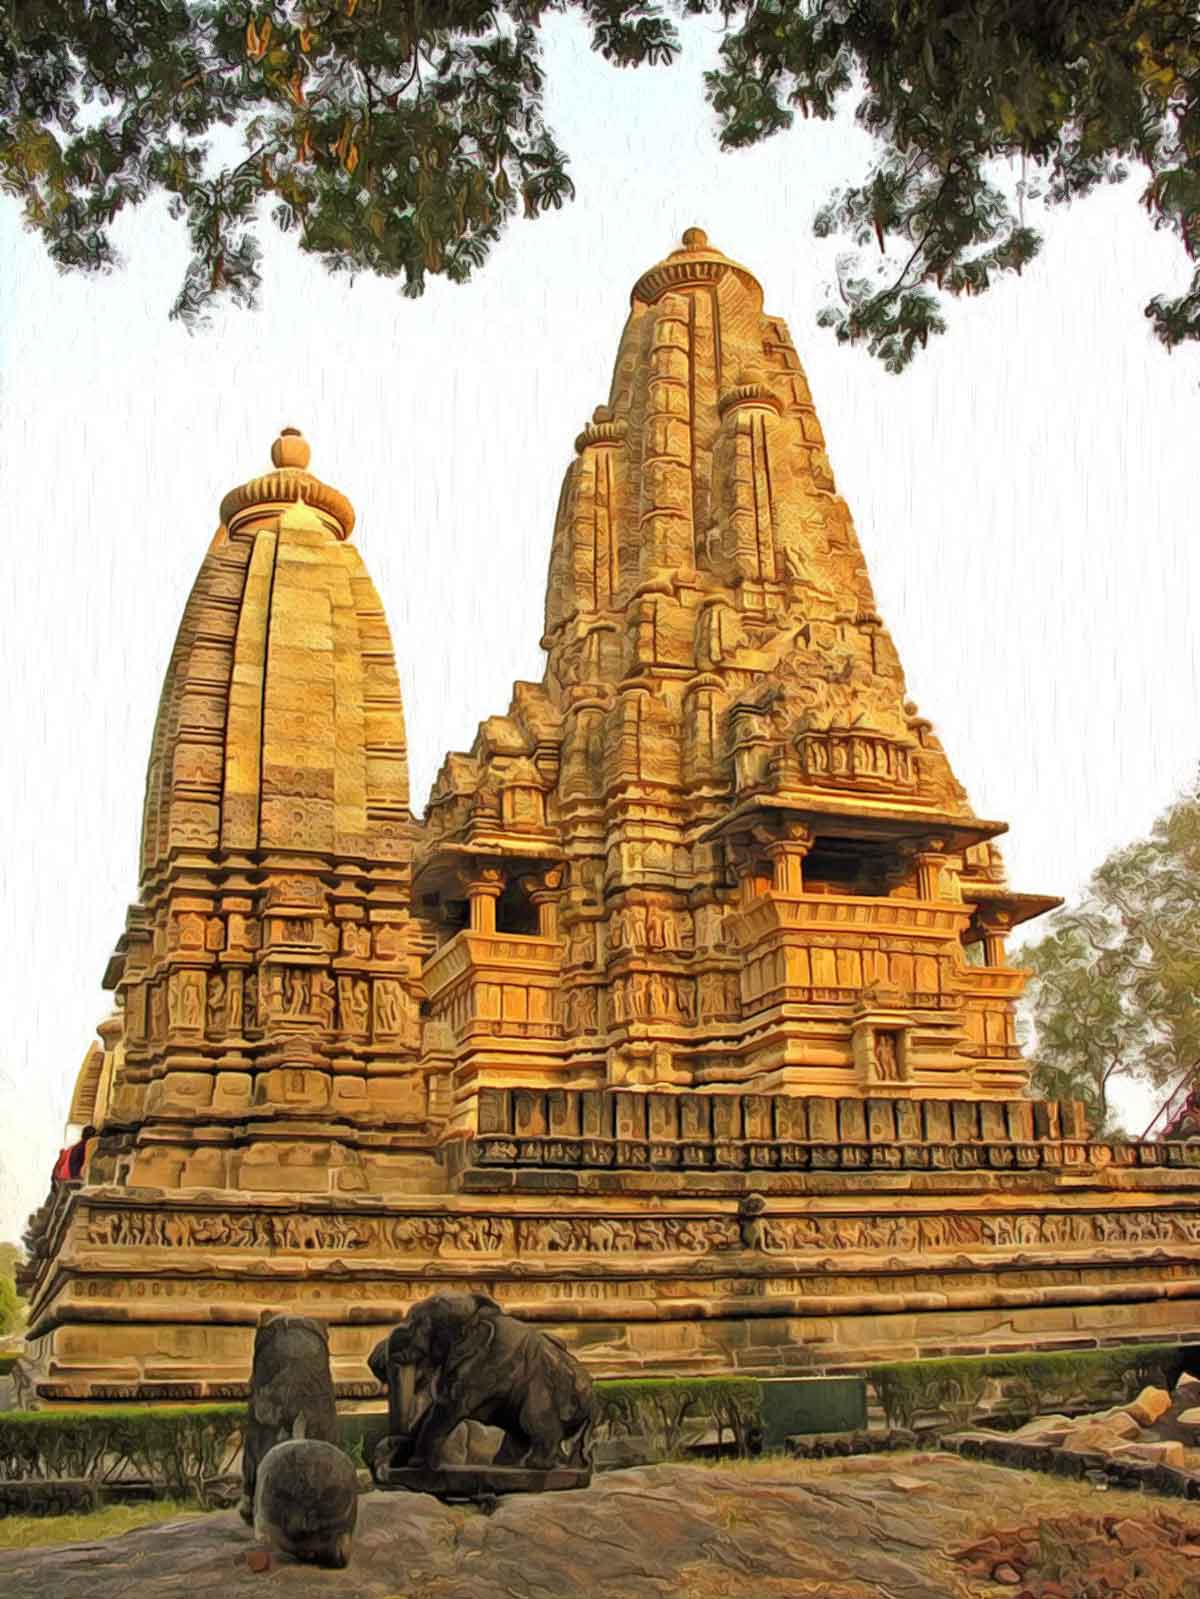 The Stunning & Magnificent 10th Century Lakshmana Mandir, located in Khajuraho is one of the oldest structures amongst the temple groups of Khajuraho